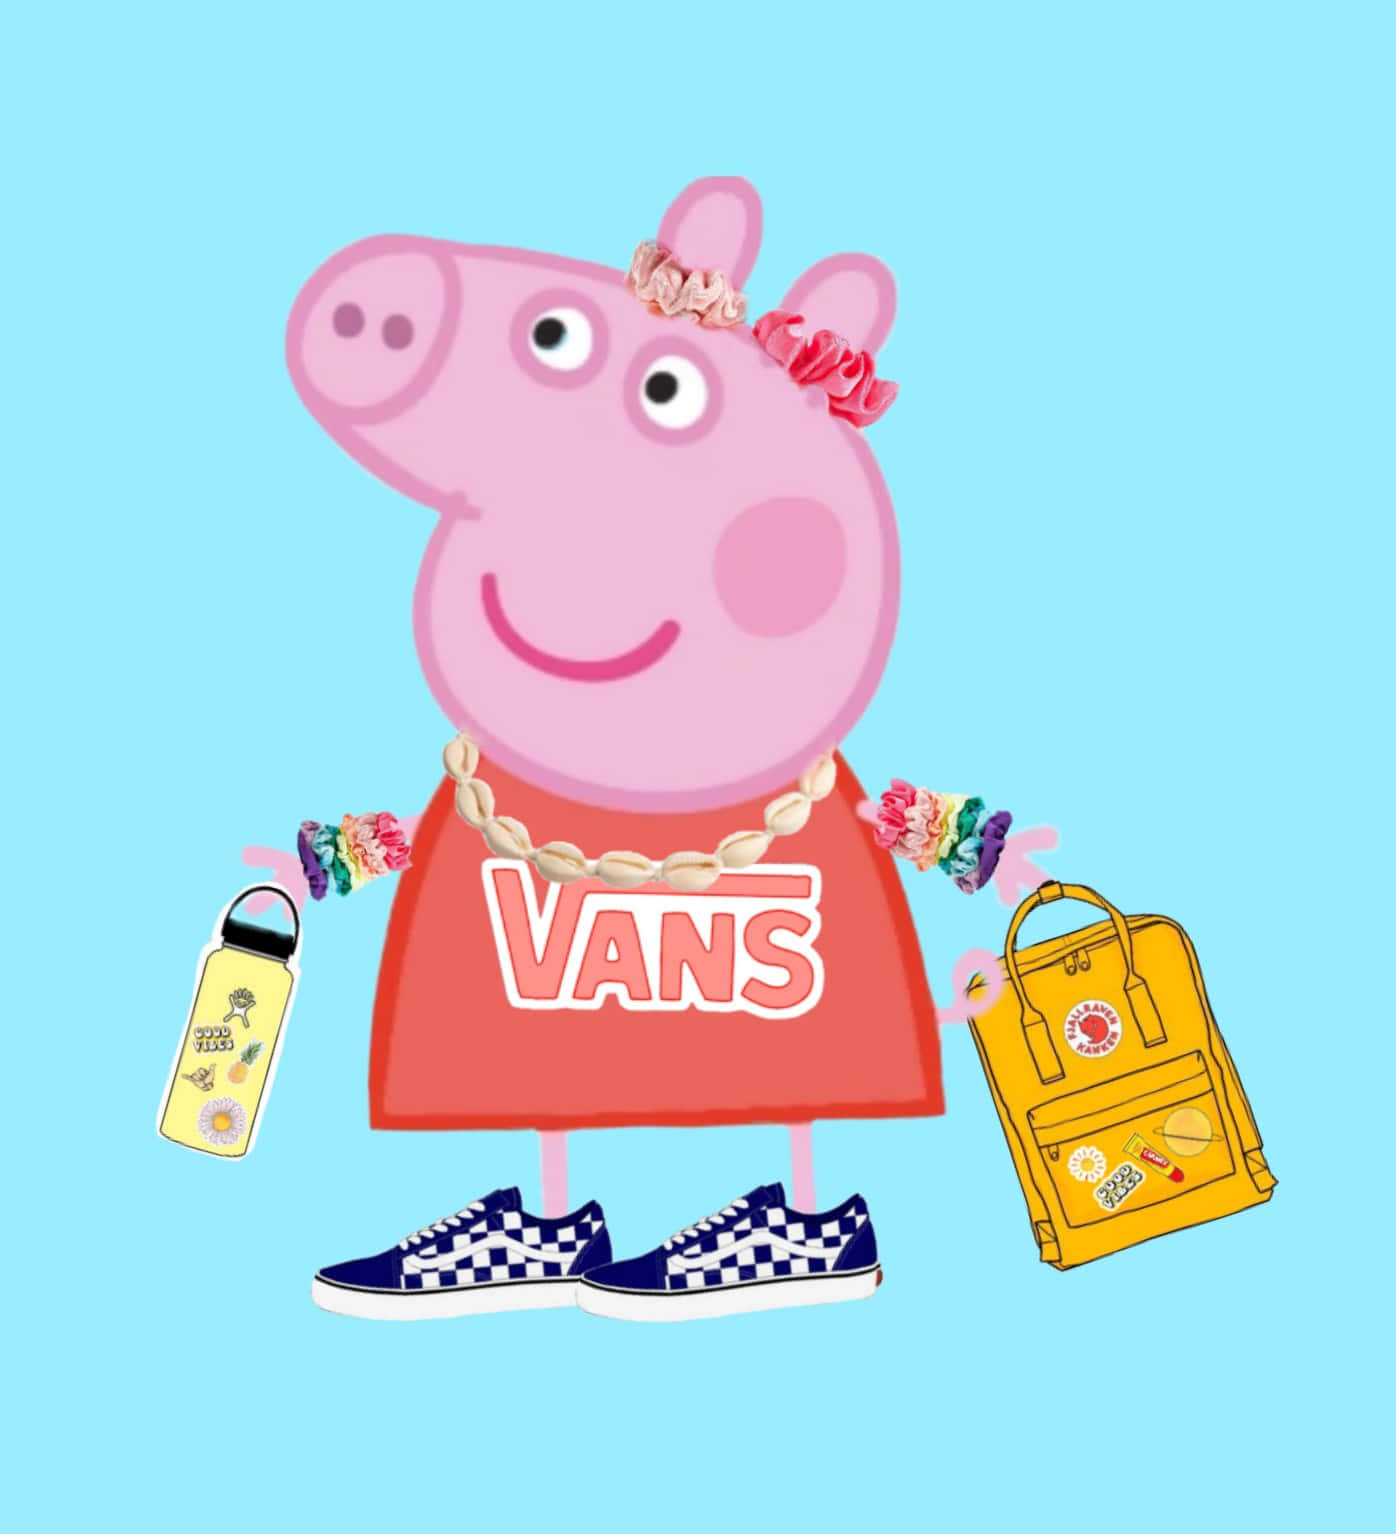 Peppig Vans - Pep Pig Vans (in Swedish, Same As In English As It Is A Proper Noun And Doesn't Change In Translation) Wallpaper